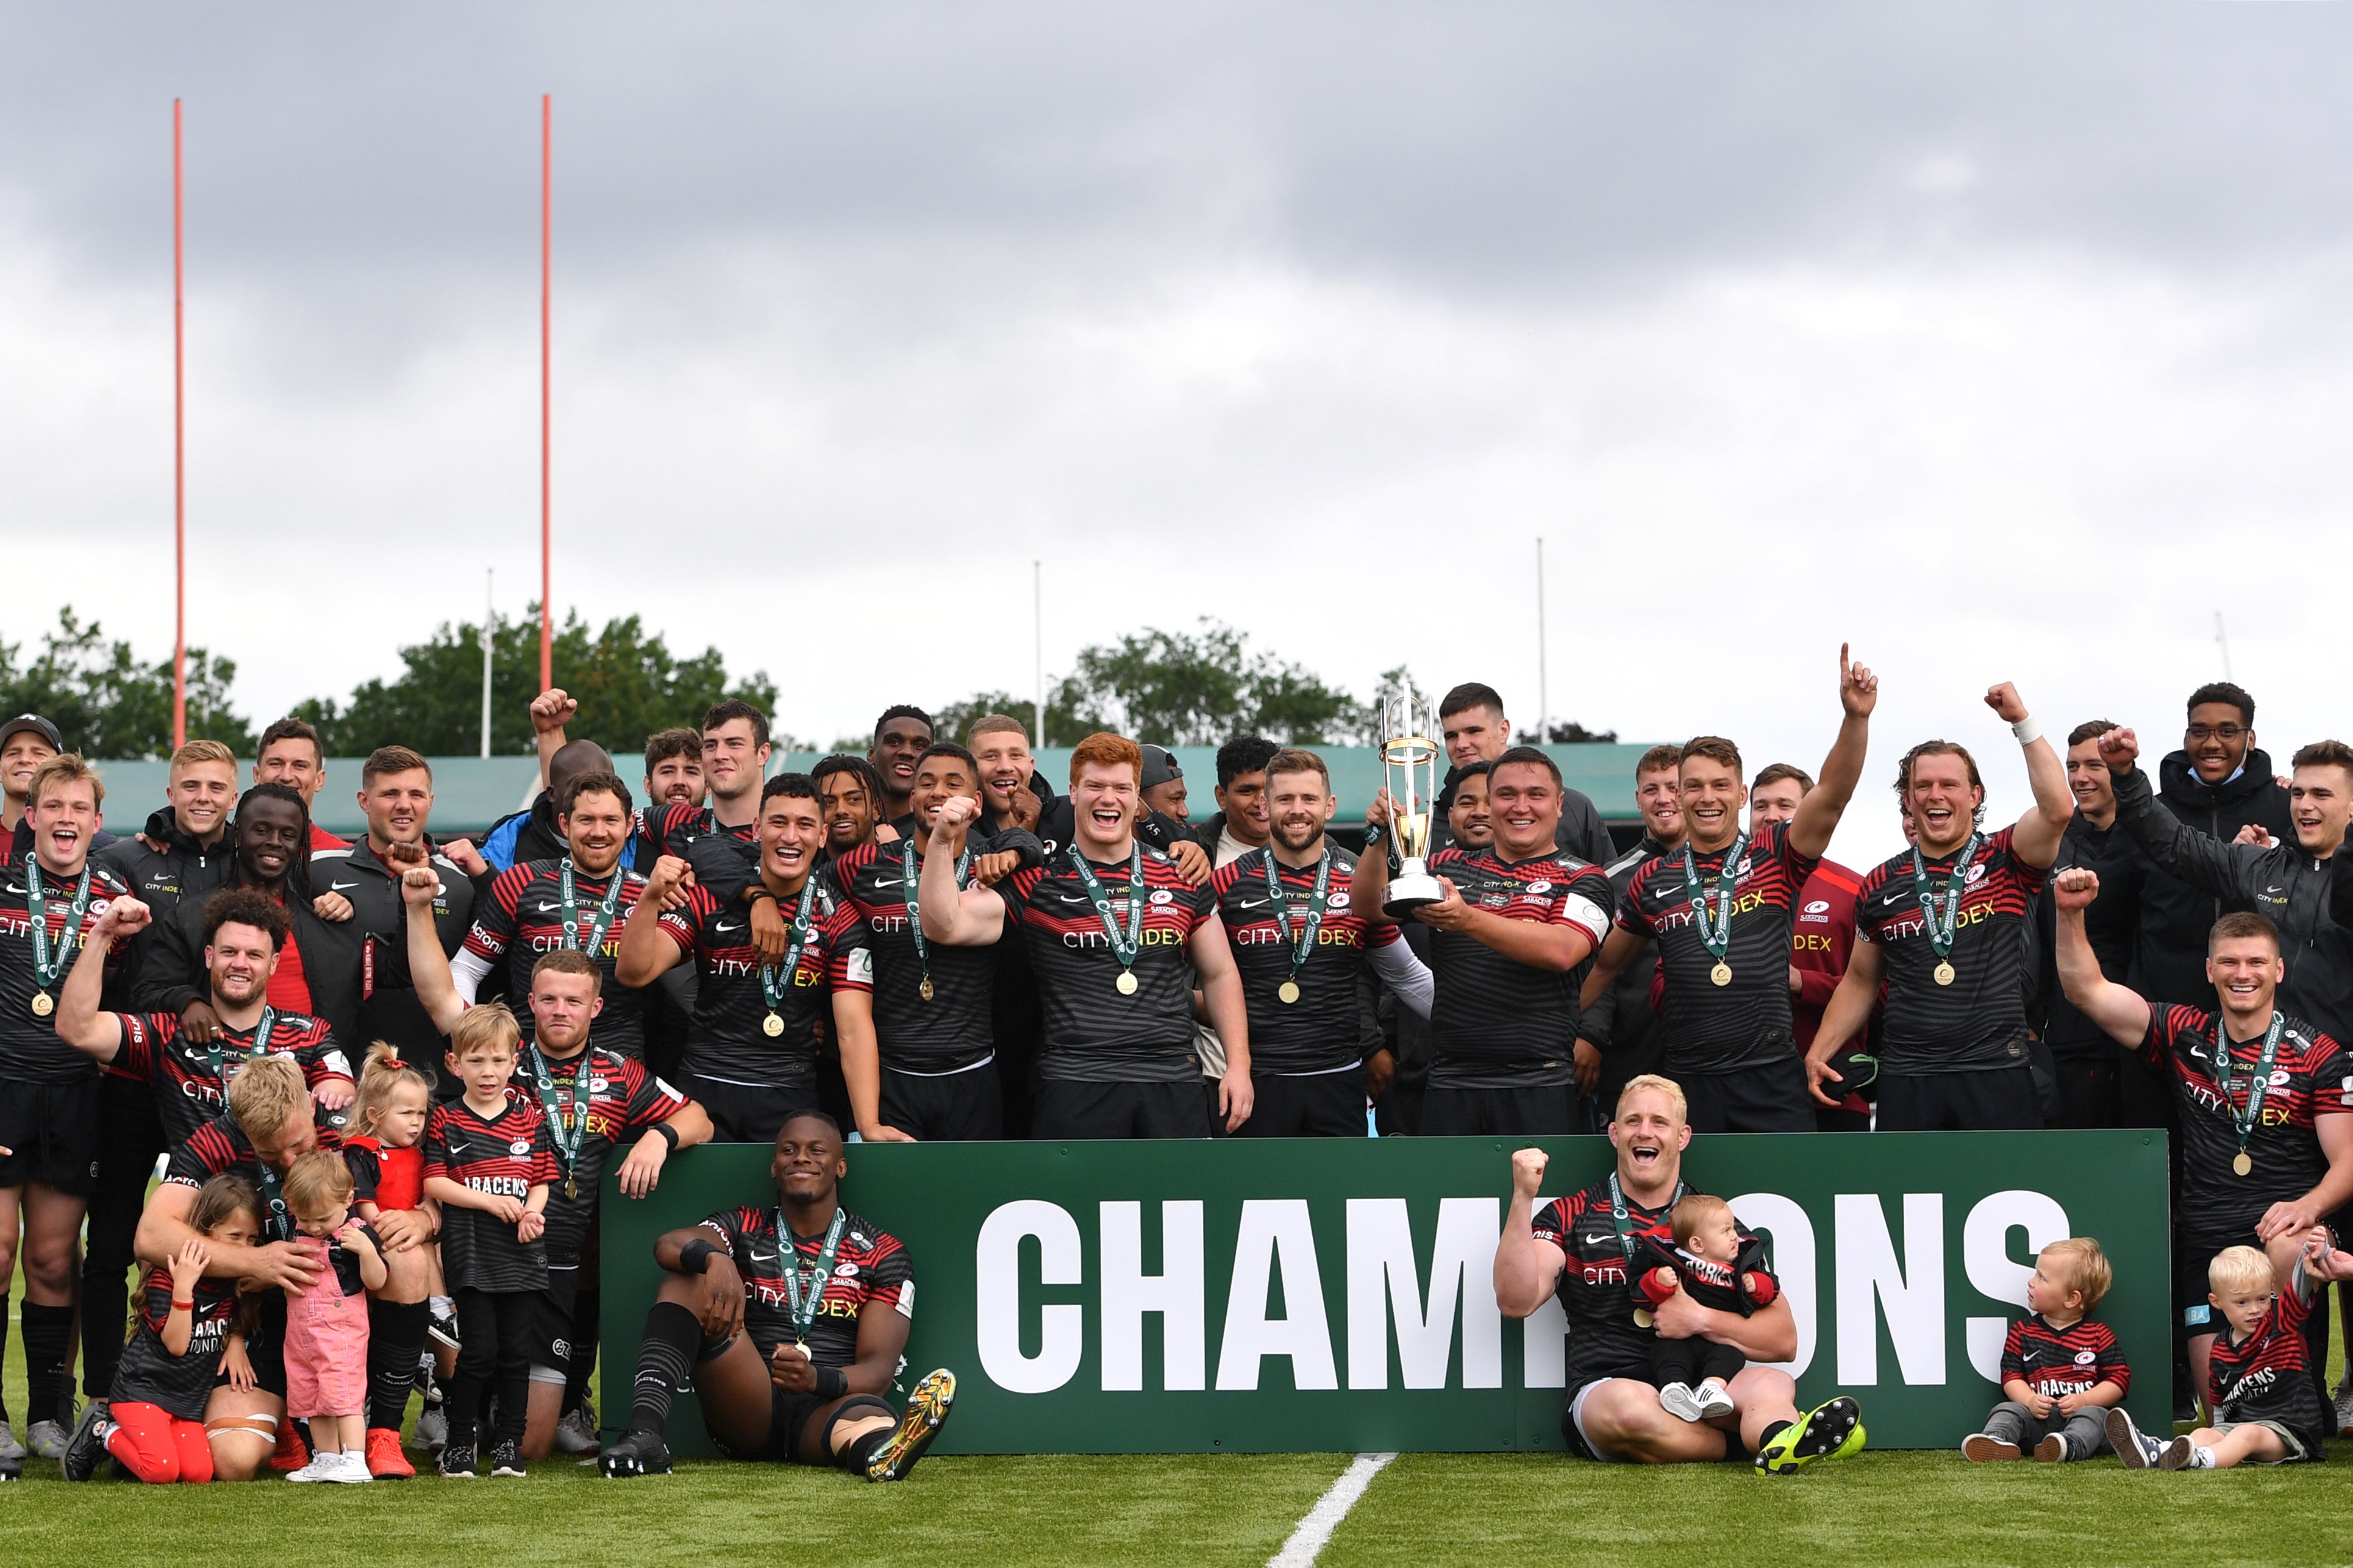 Saracens are back in the Premiership after winning the Championship last season